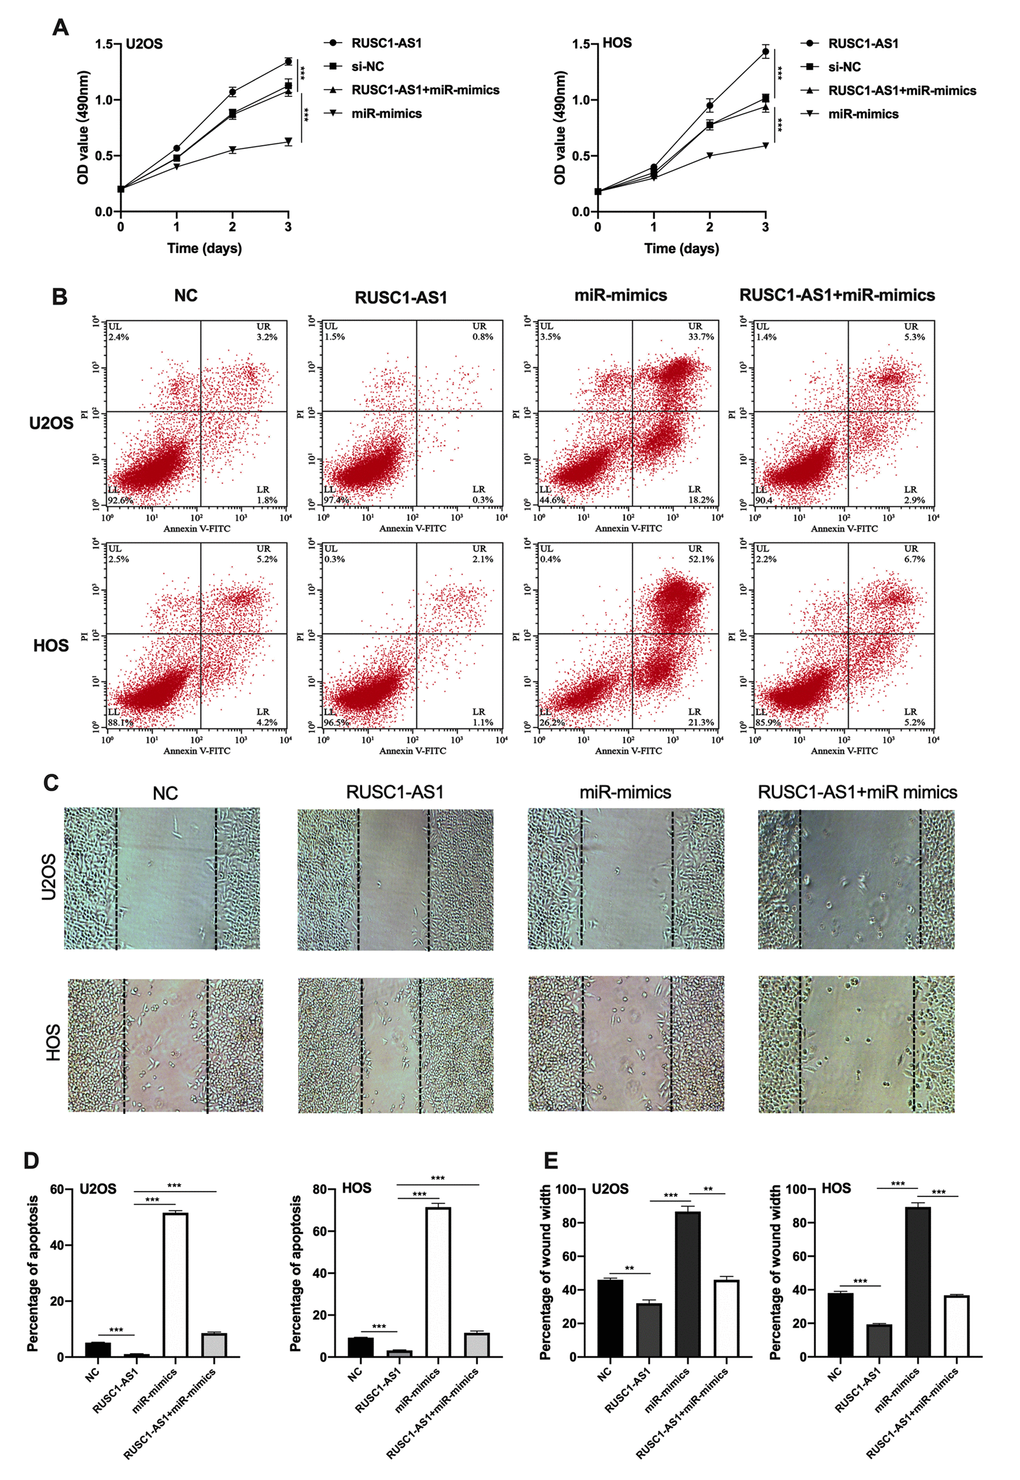 RUSC1-AS1 exerted its role through miR-340-5p. (A) CCK-8 proliferation assay, (B, D) flow cytometry apoptosis assay, (C, E) wound healing assay in U2OS/HOS cells or U2OS/HOS cells transfected with RUSC1-AS1 plasmid, miR-mimics or RUSC1-AS1+miR-mimics.